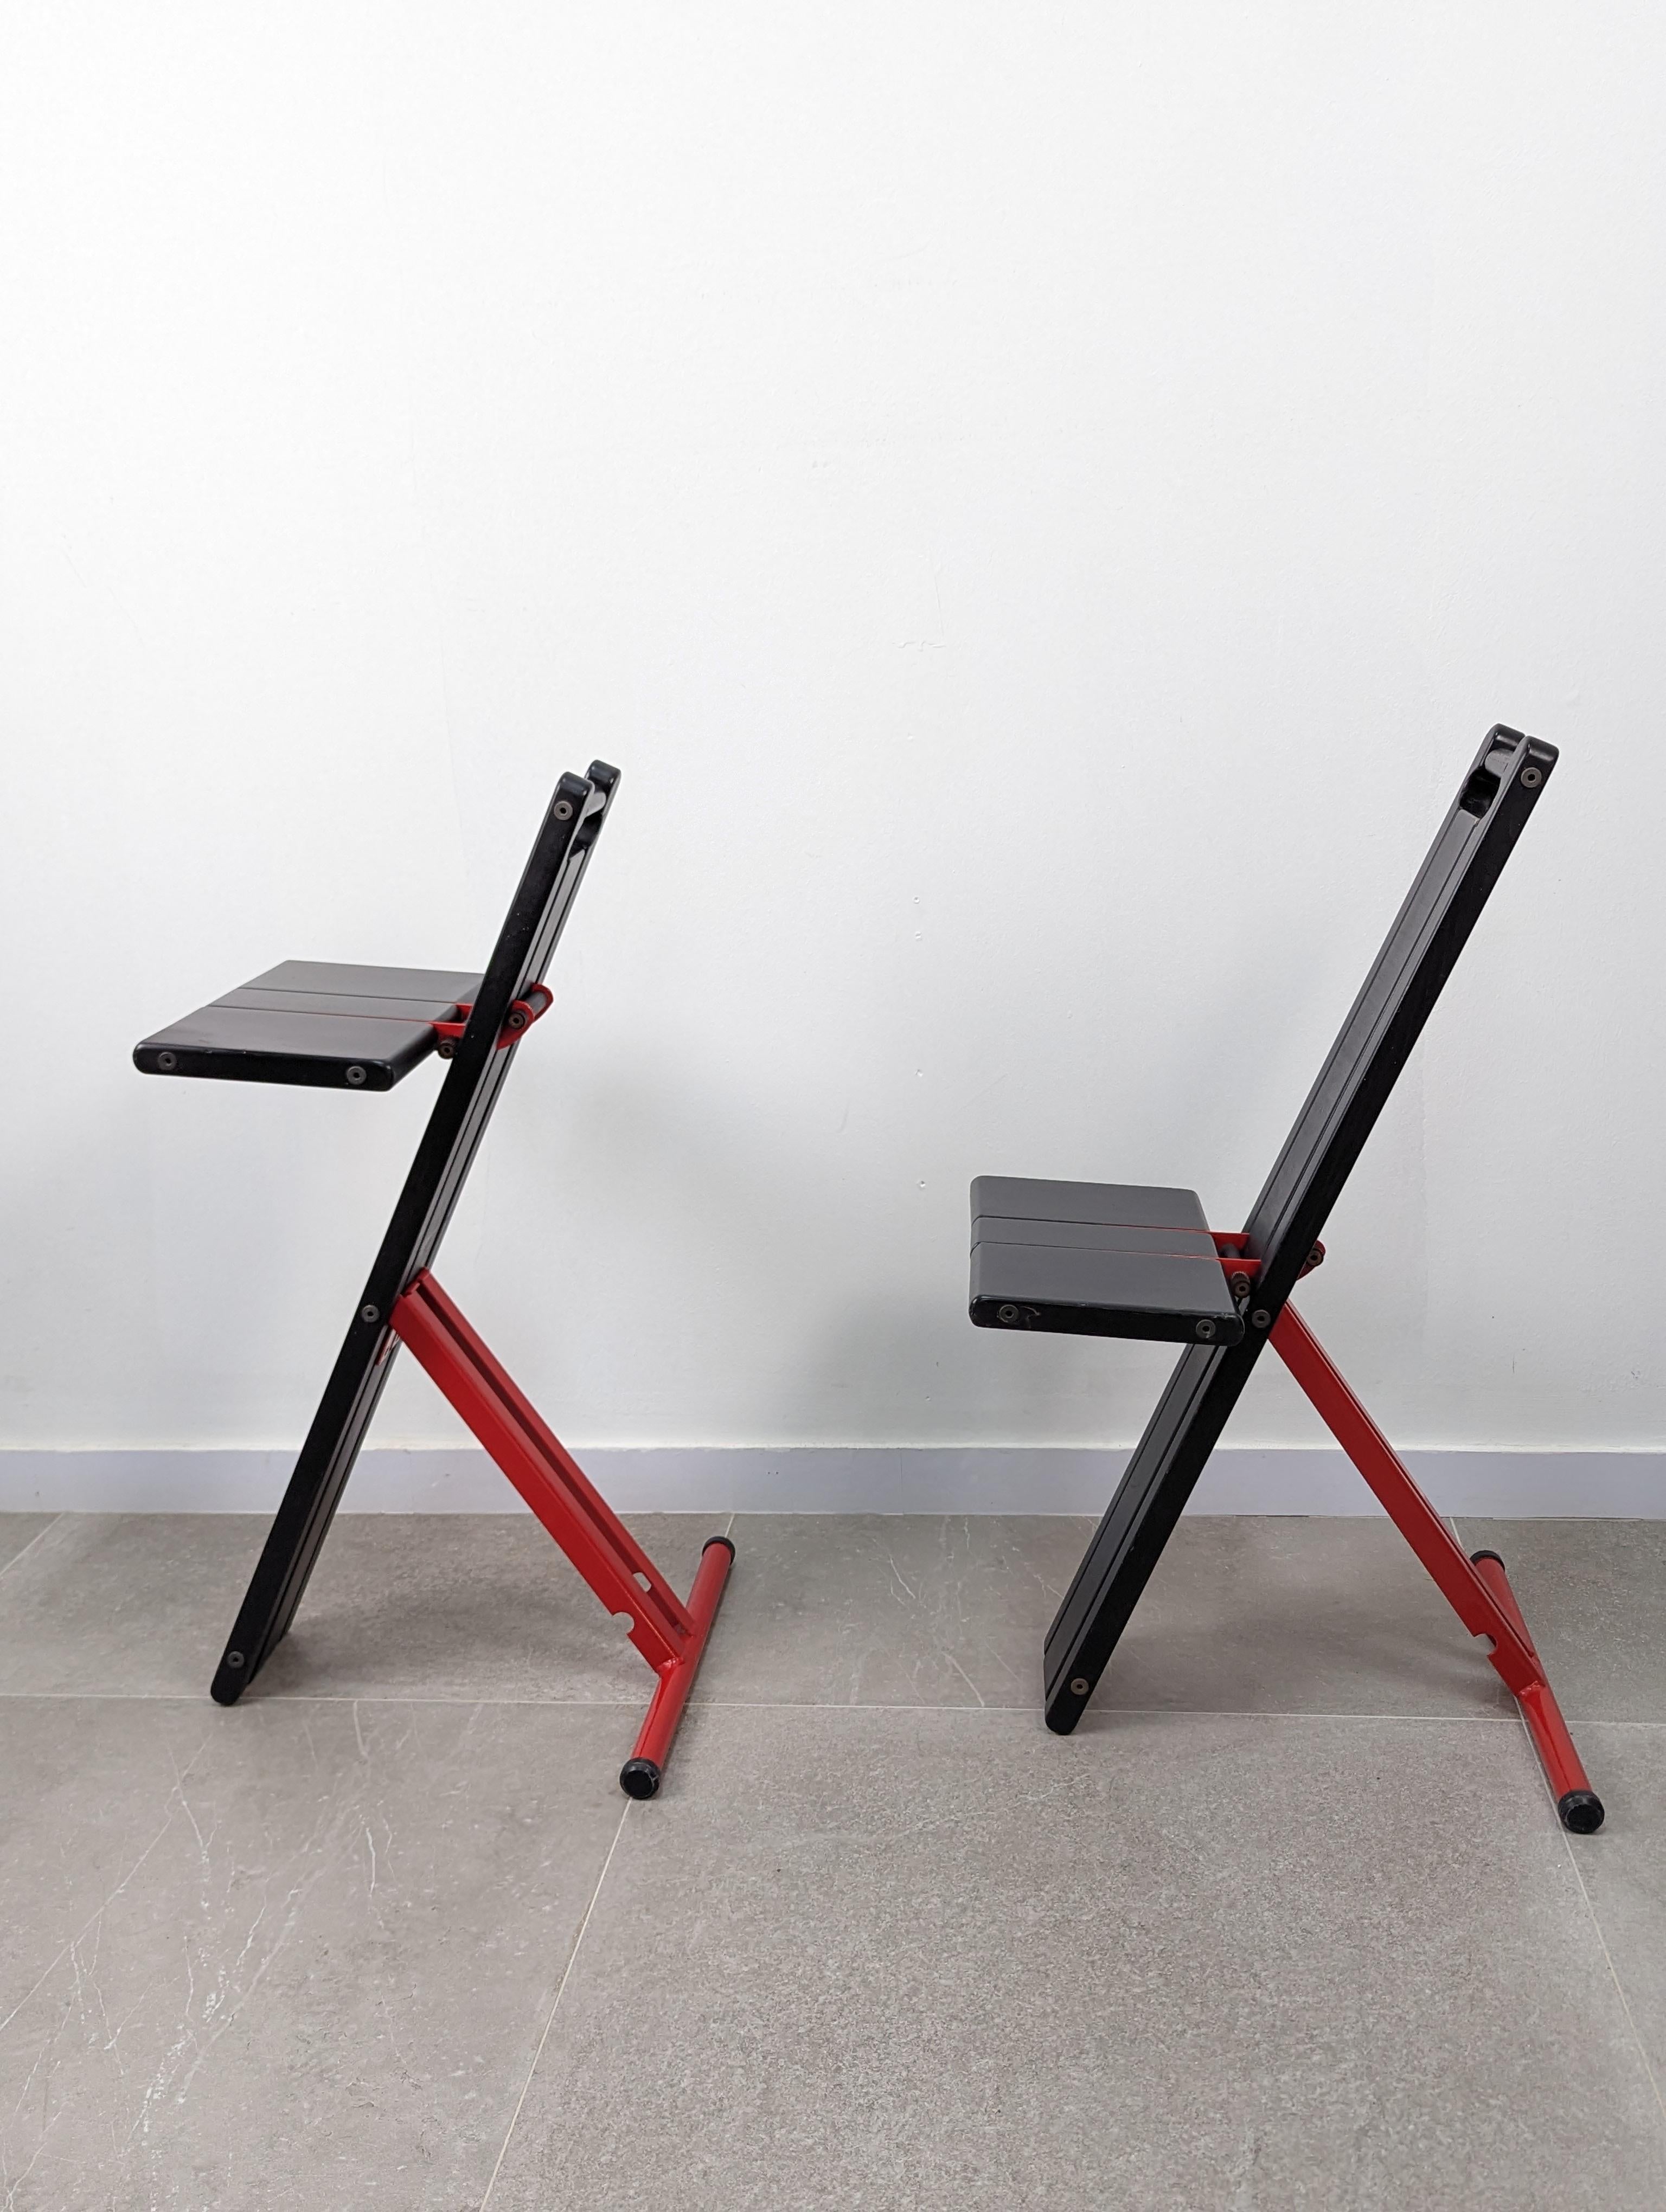 Late 20th Century Pair of Locust chairs by Torstein Nilsen for Møremøbler AS 1982